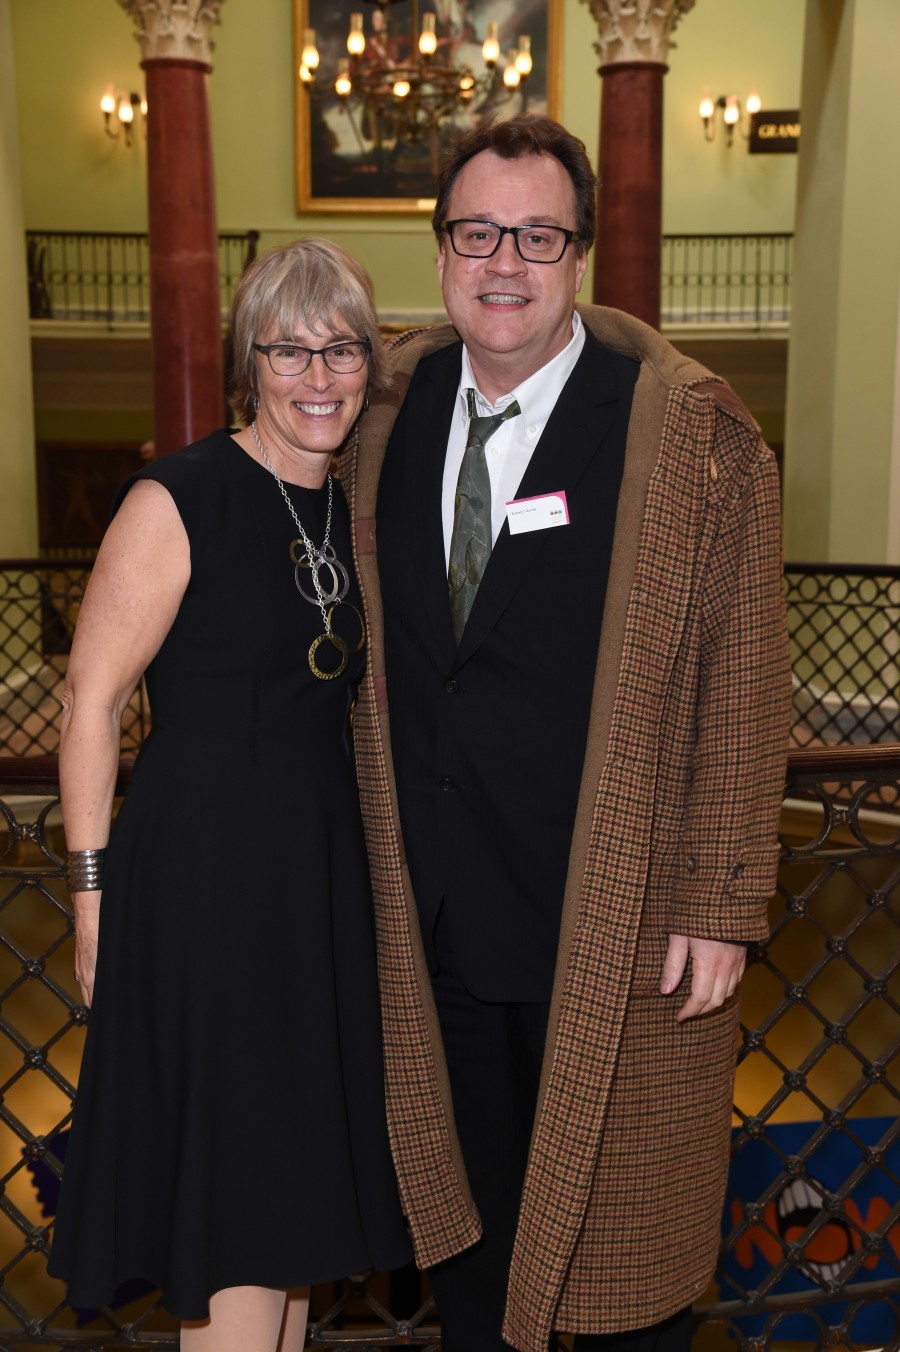 BPG Awards March 2016. Kate with Russell T Davies, who revived Dr Who and wrote Cucumber, Banana and Tofu for Channel4, E4 and All 4